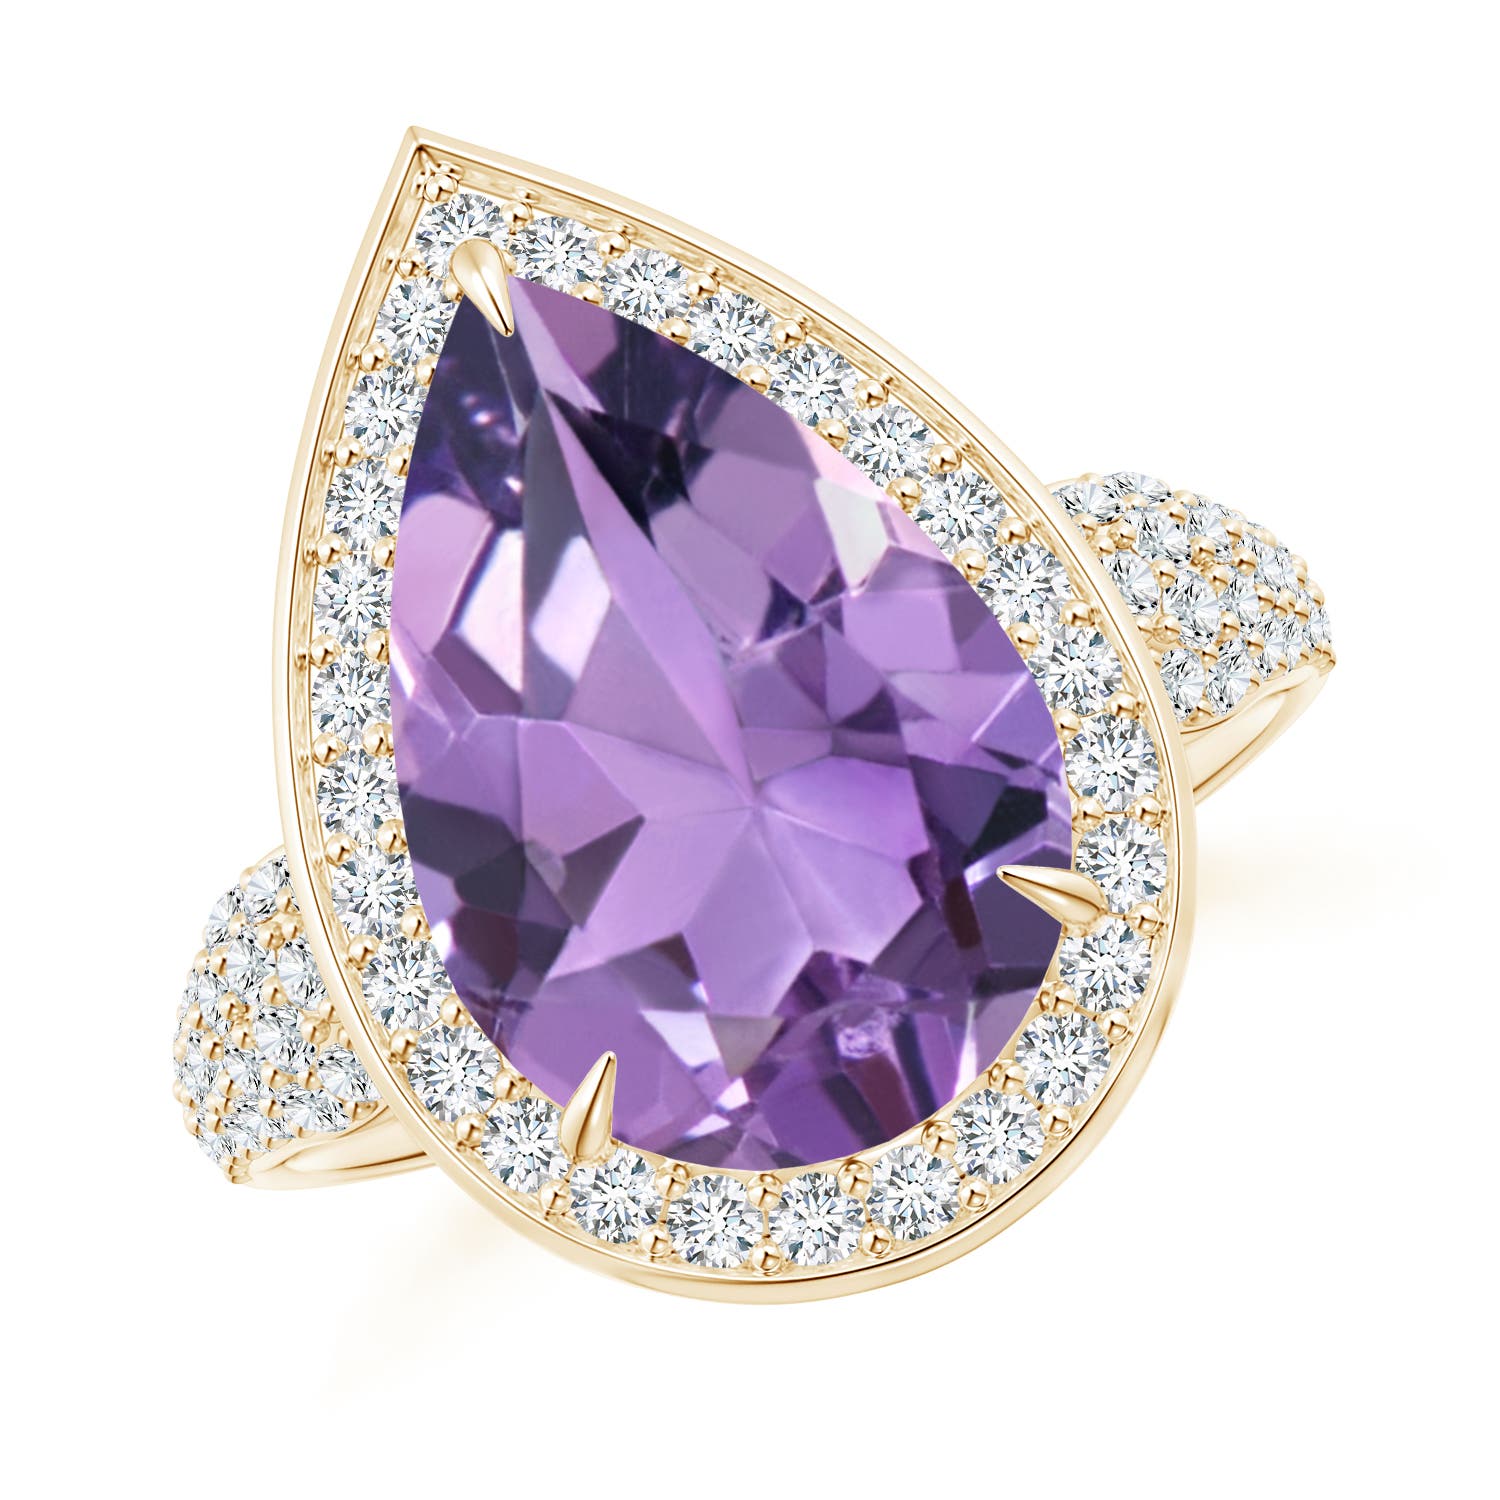 A - Amethyst / 5.48 CT / 14 KT Yellow Gold